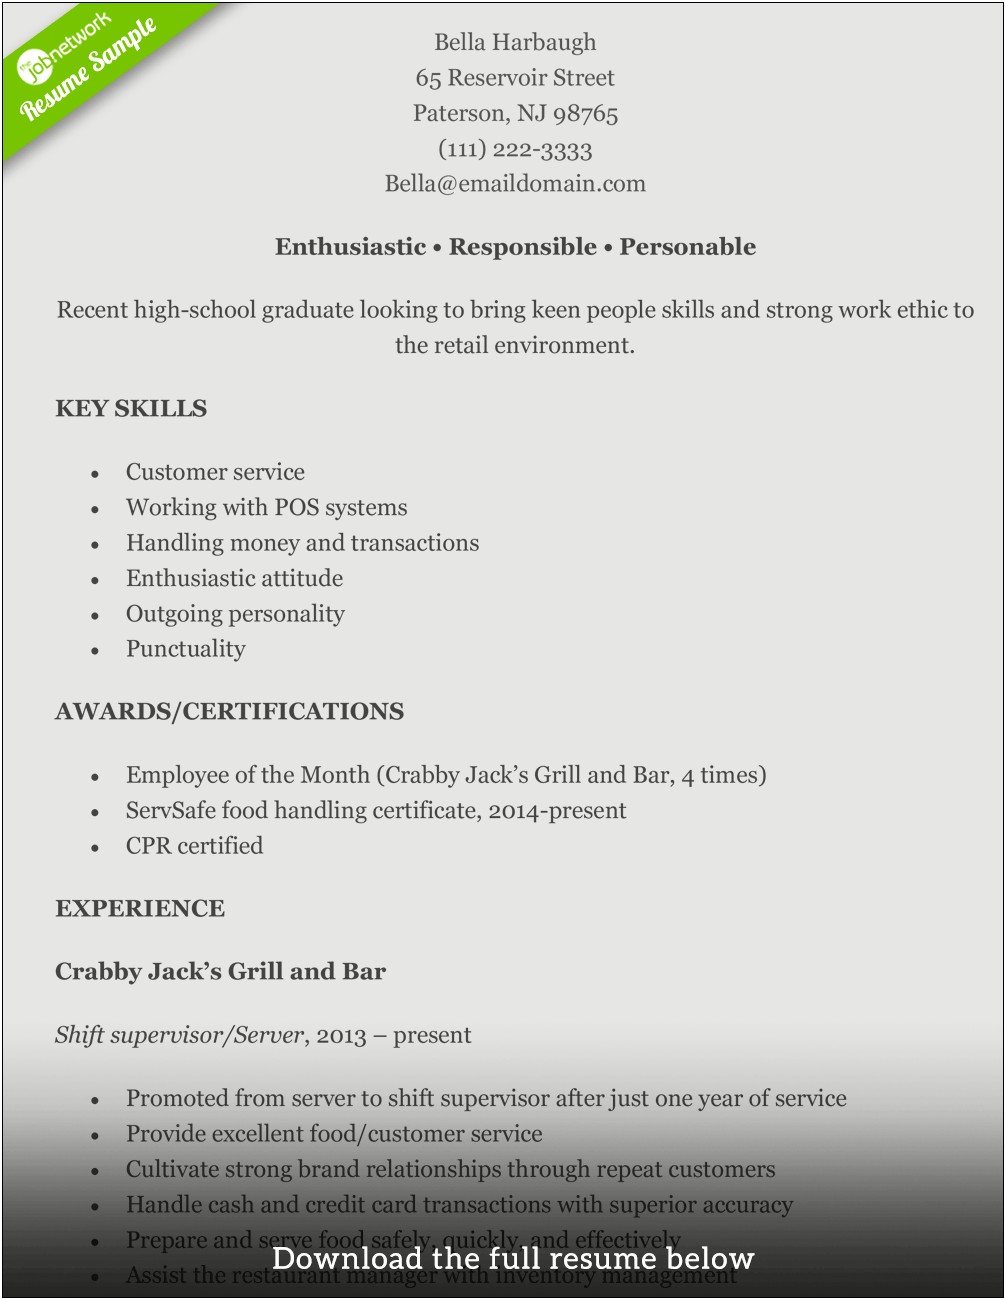 General Retail Resume Objective Examples